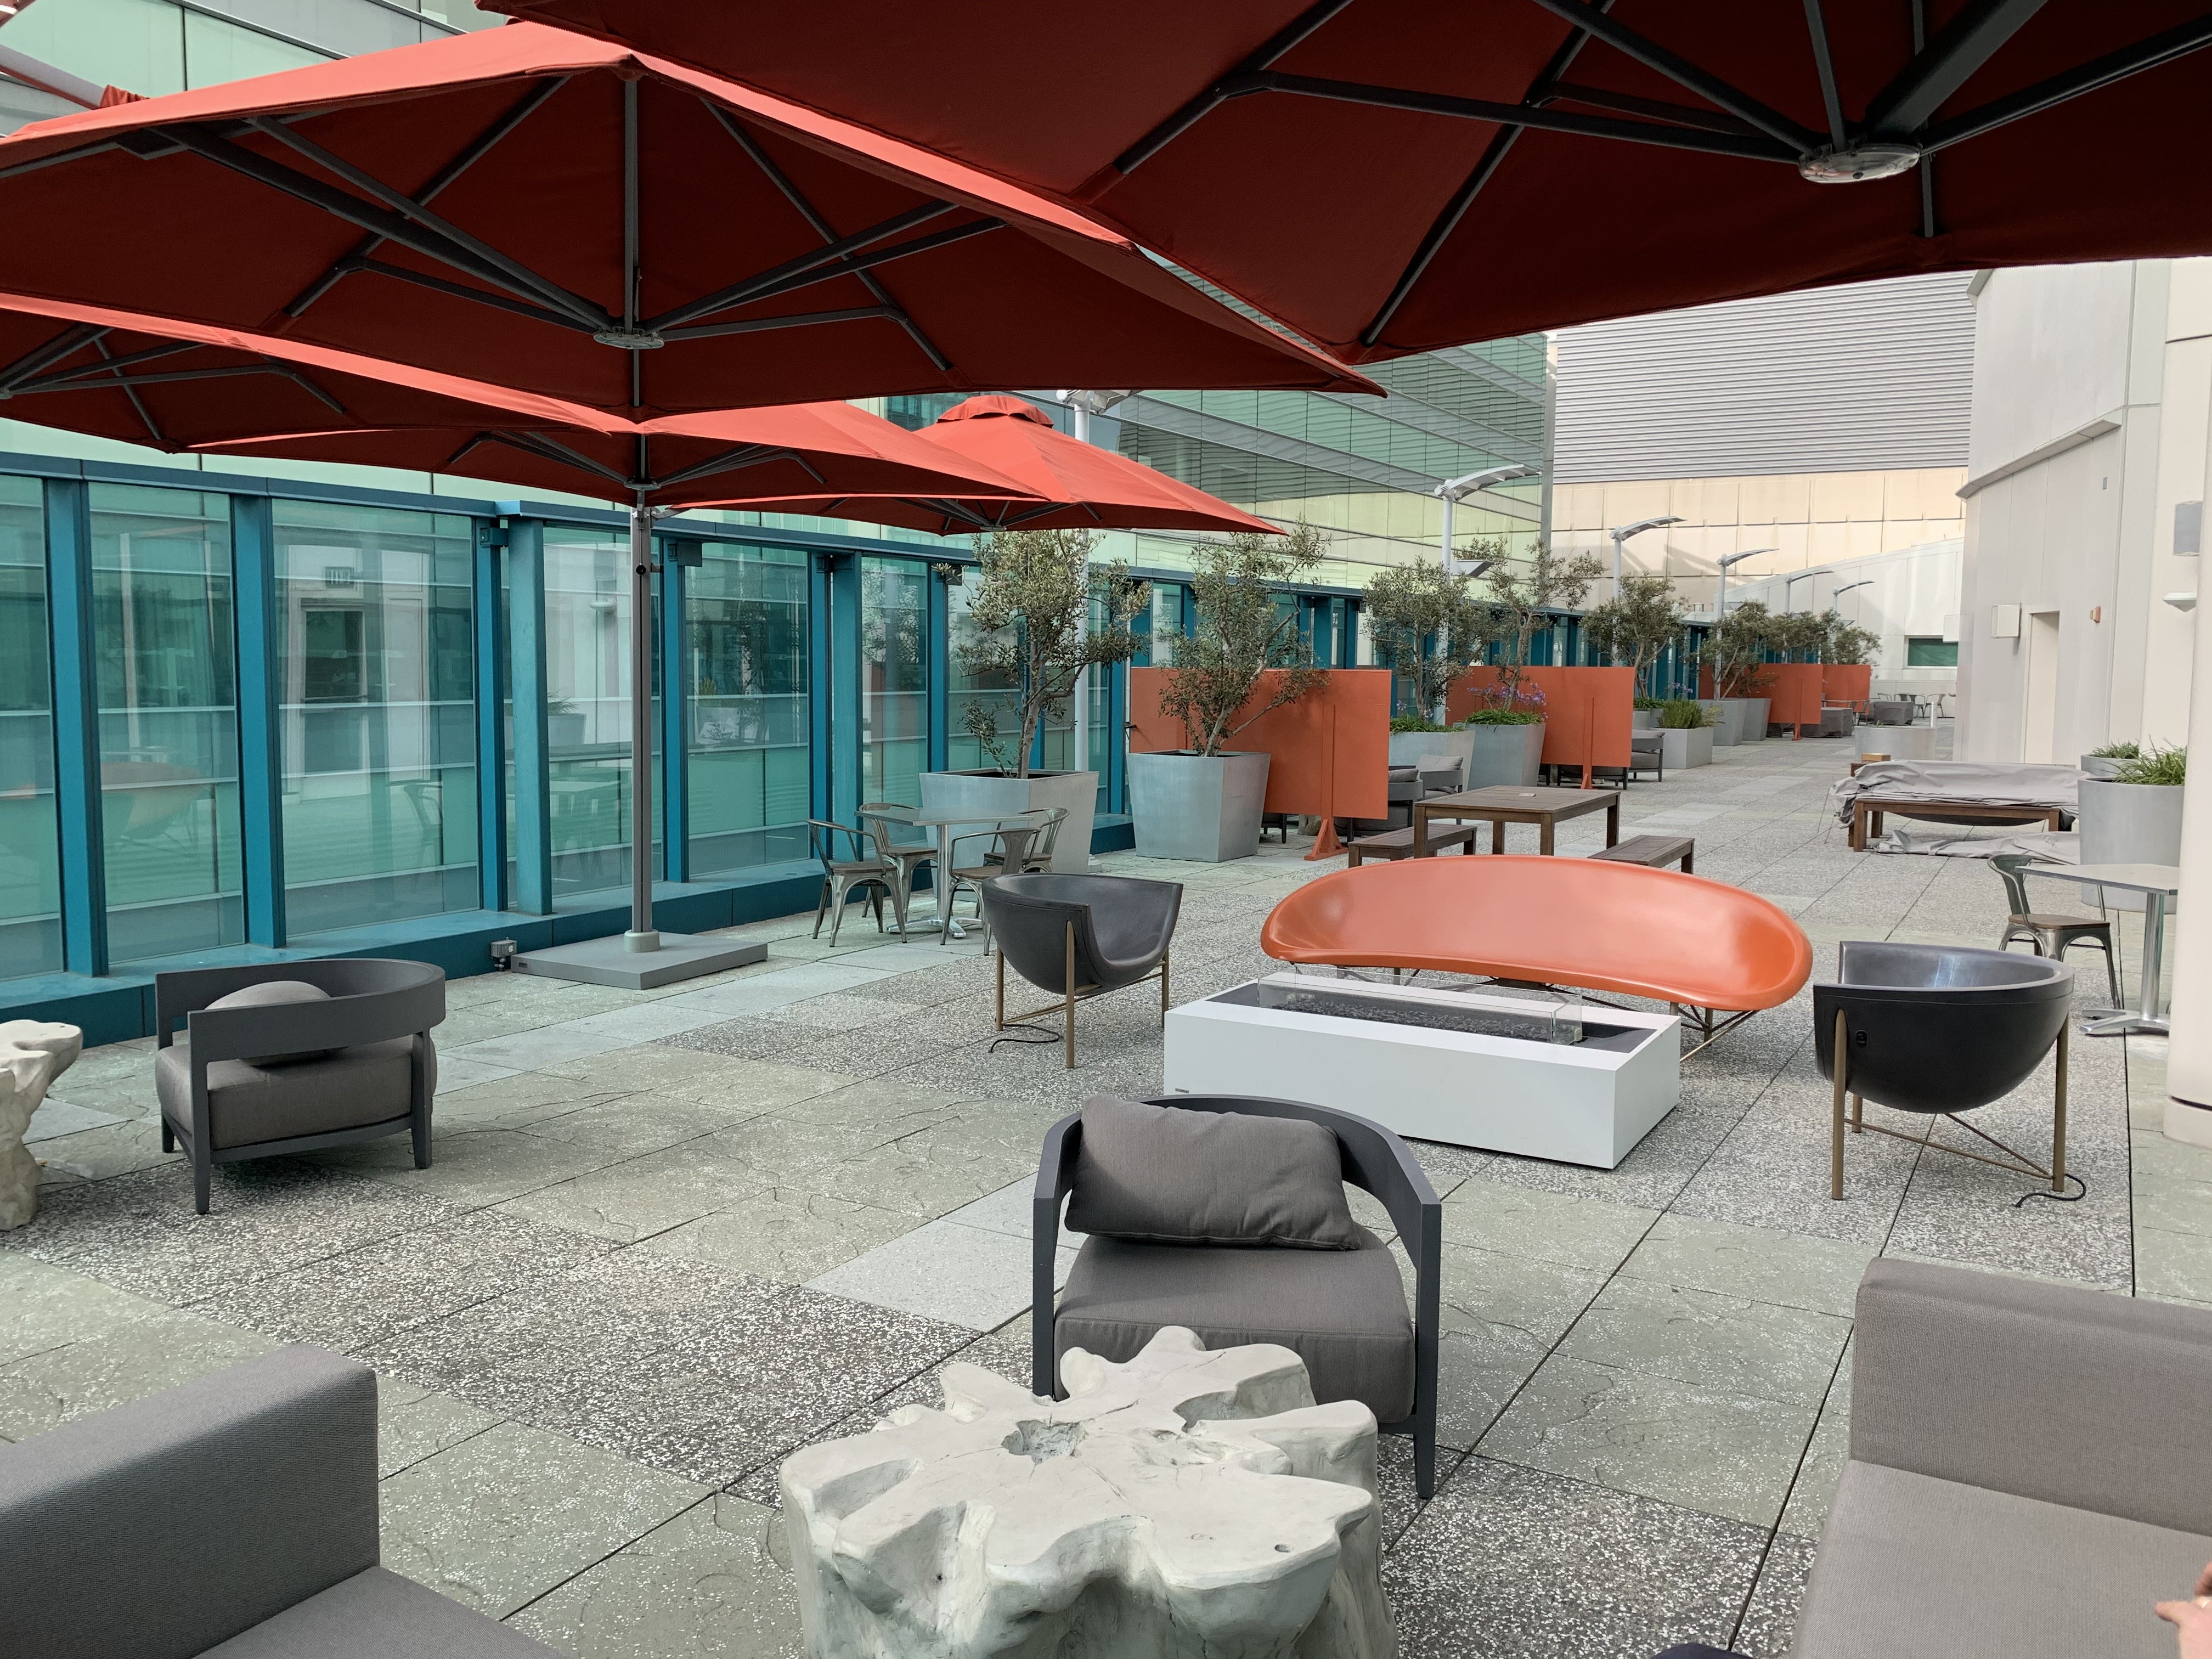 Take a breath of fresh air at our outdoor terrace on the 6th floor